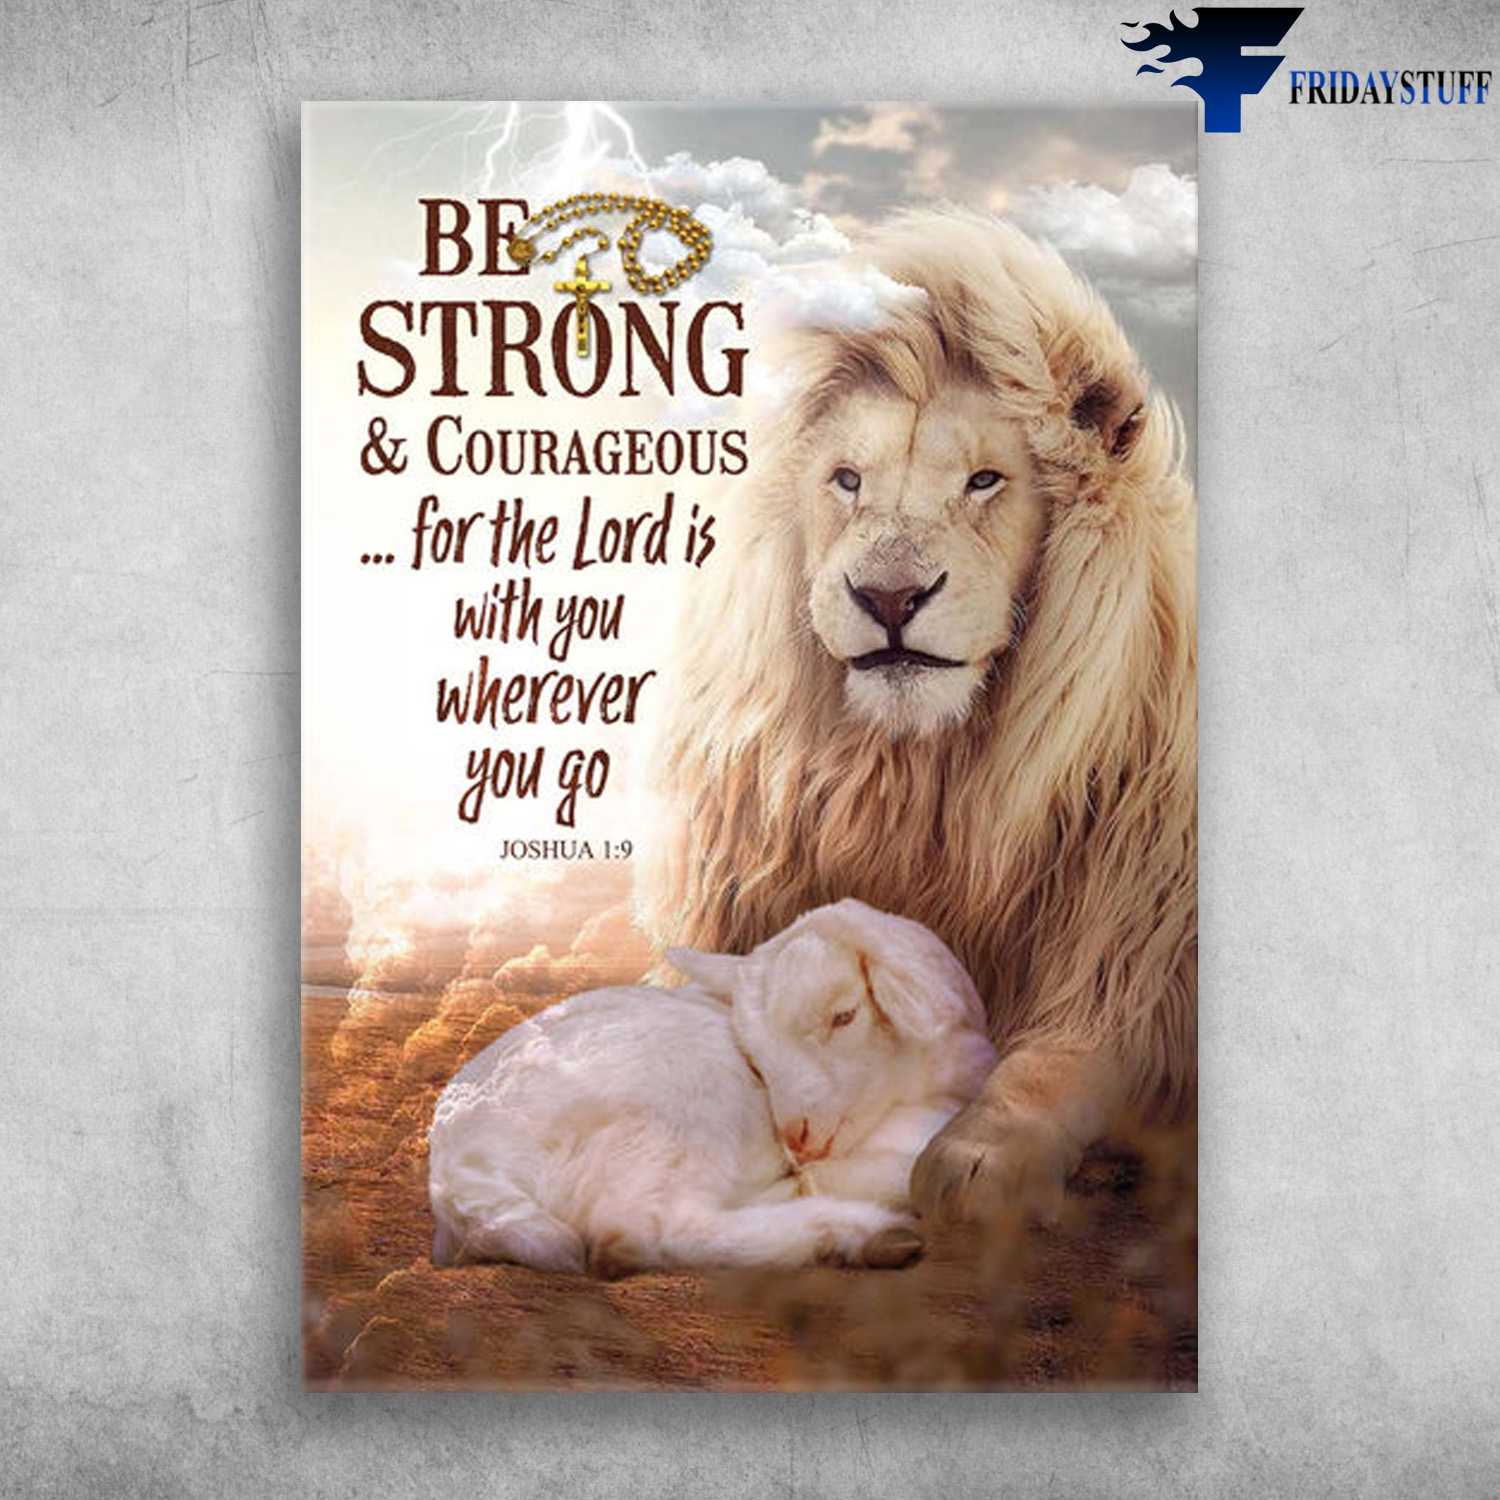 Lion And Lamb - Be Strong And Courgeous, For The Lord Is With You, Wherever You Go